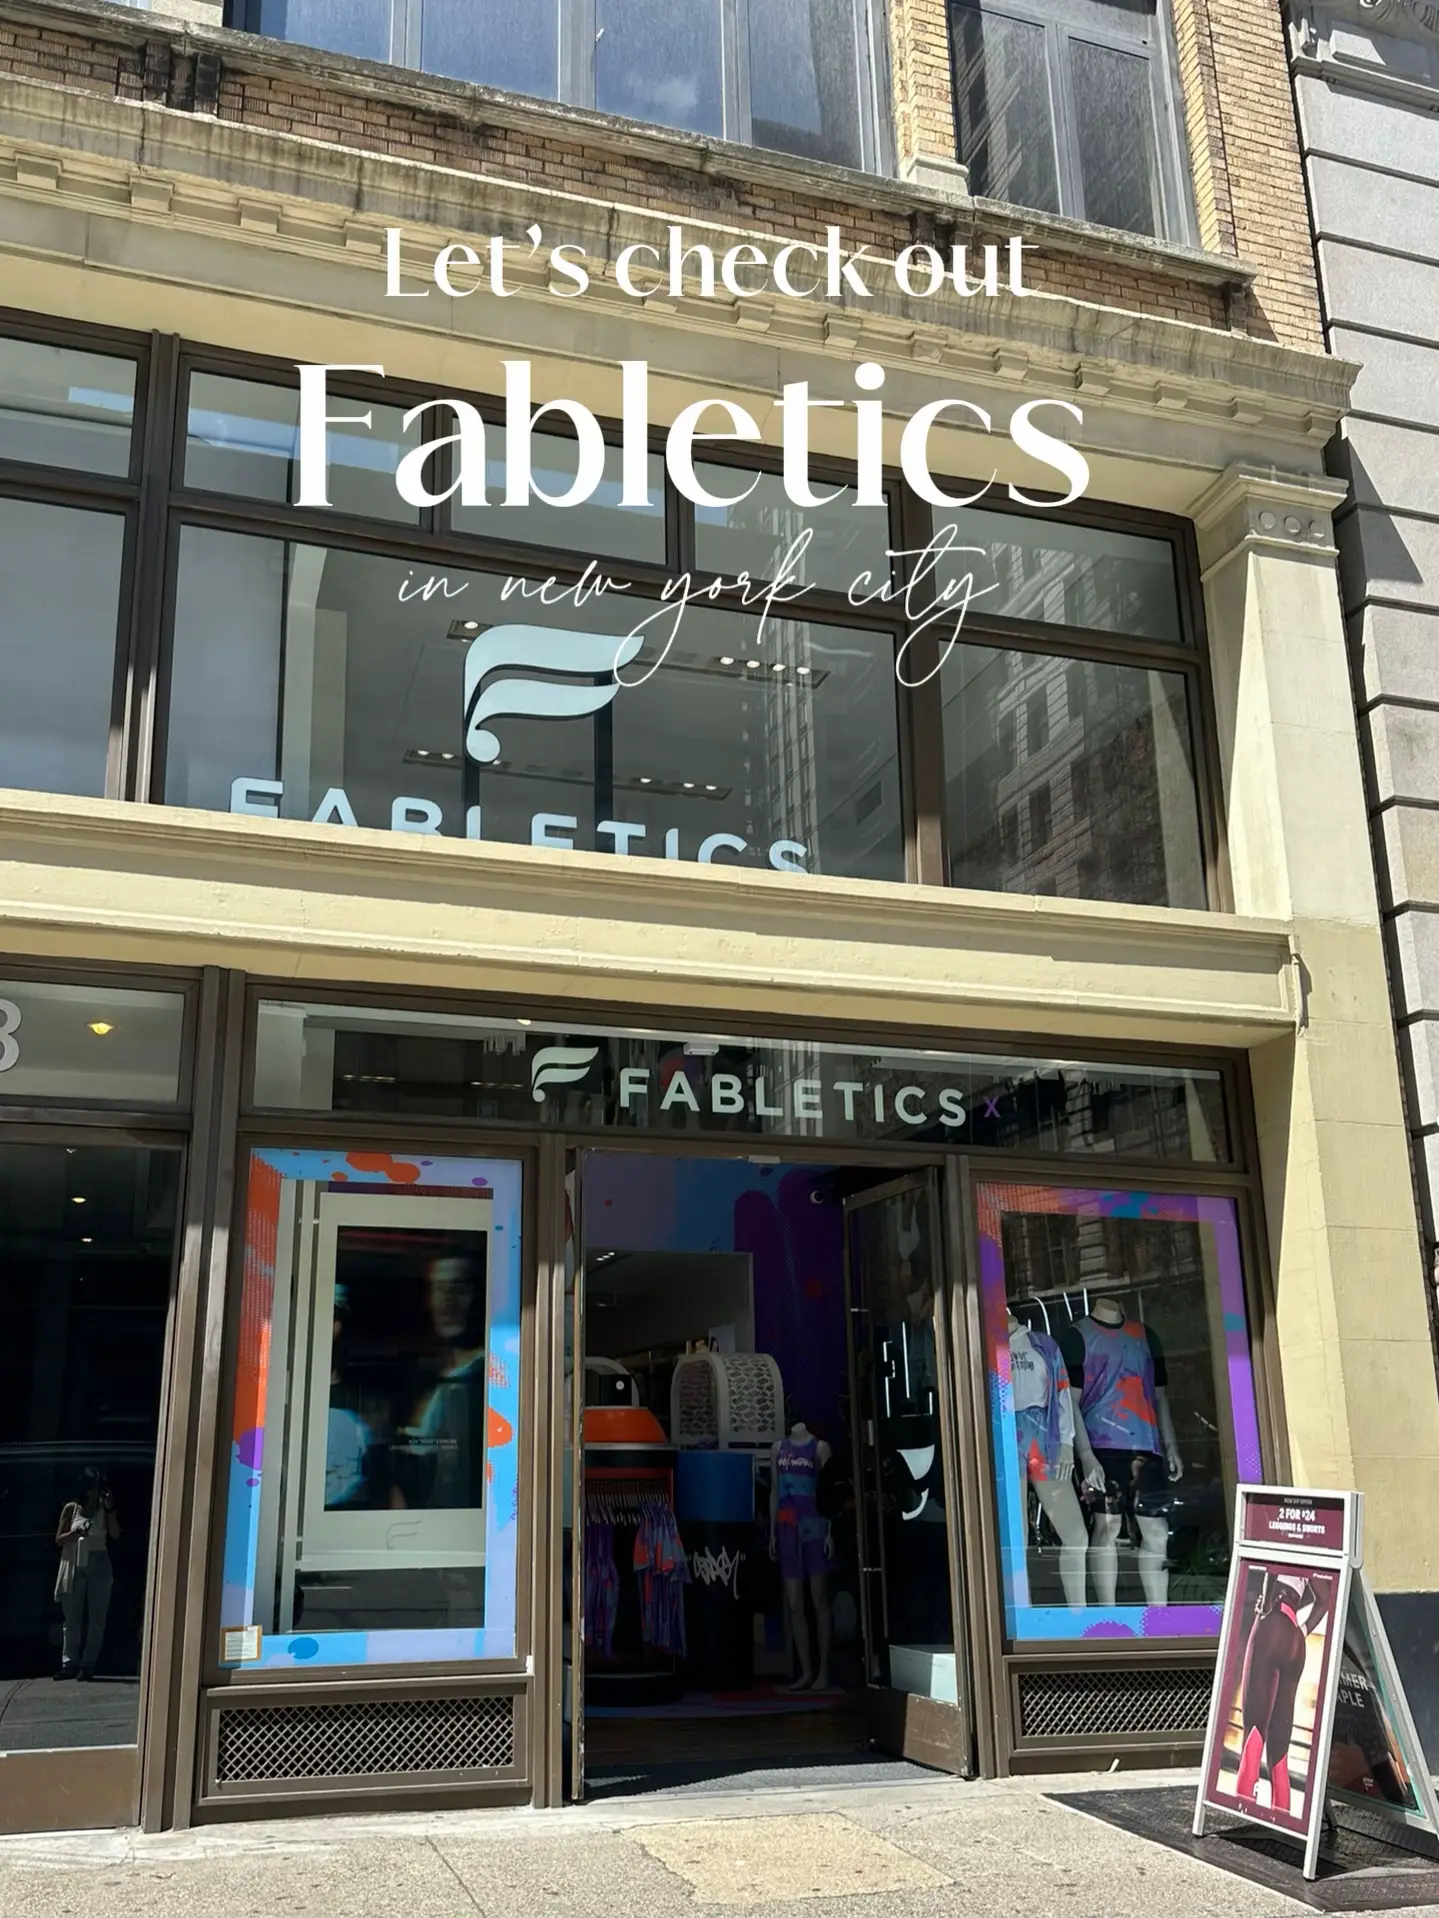 LET'S CHECK OUT FABLETICS IN NYC